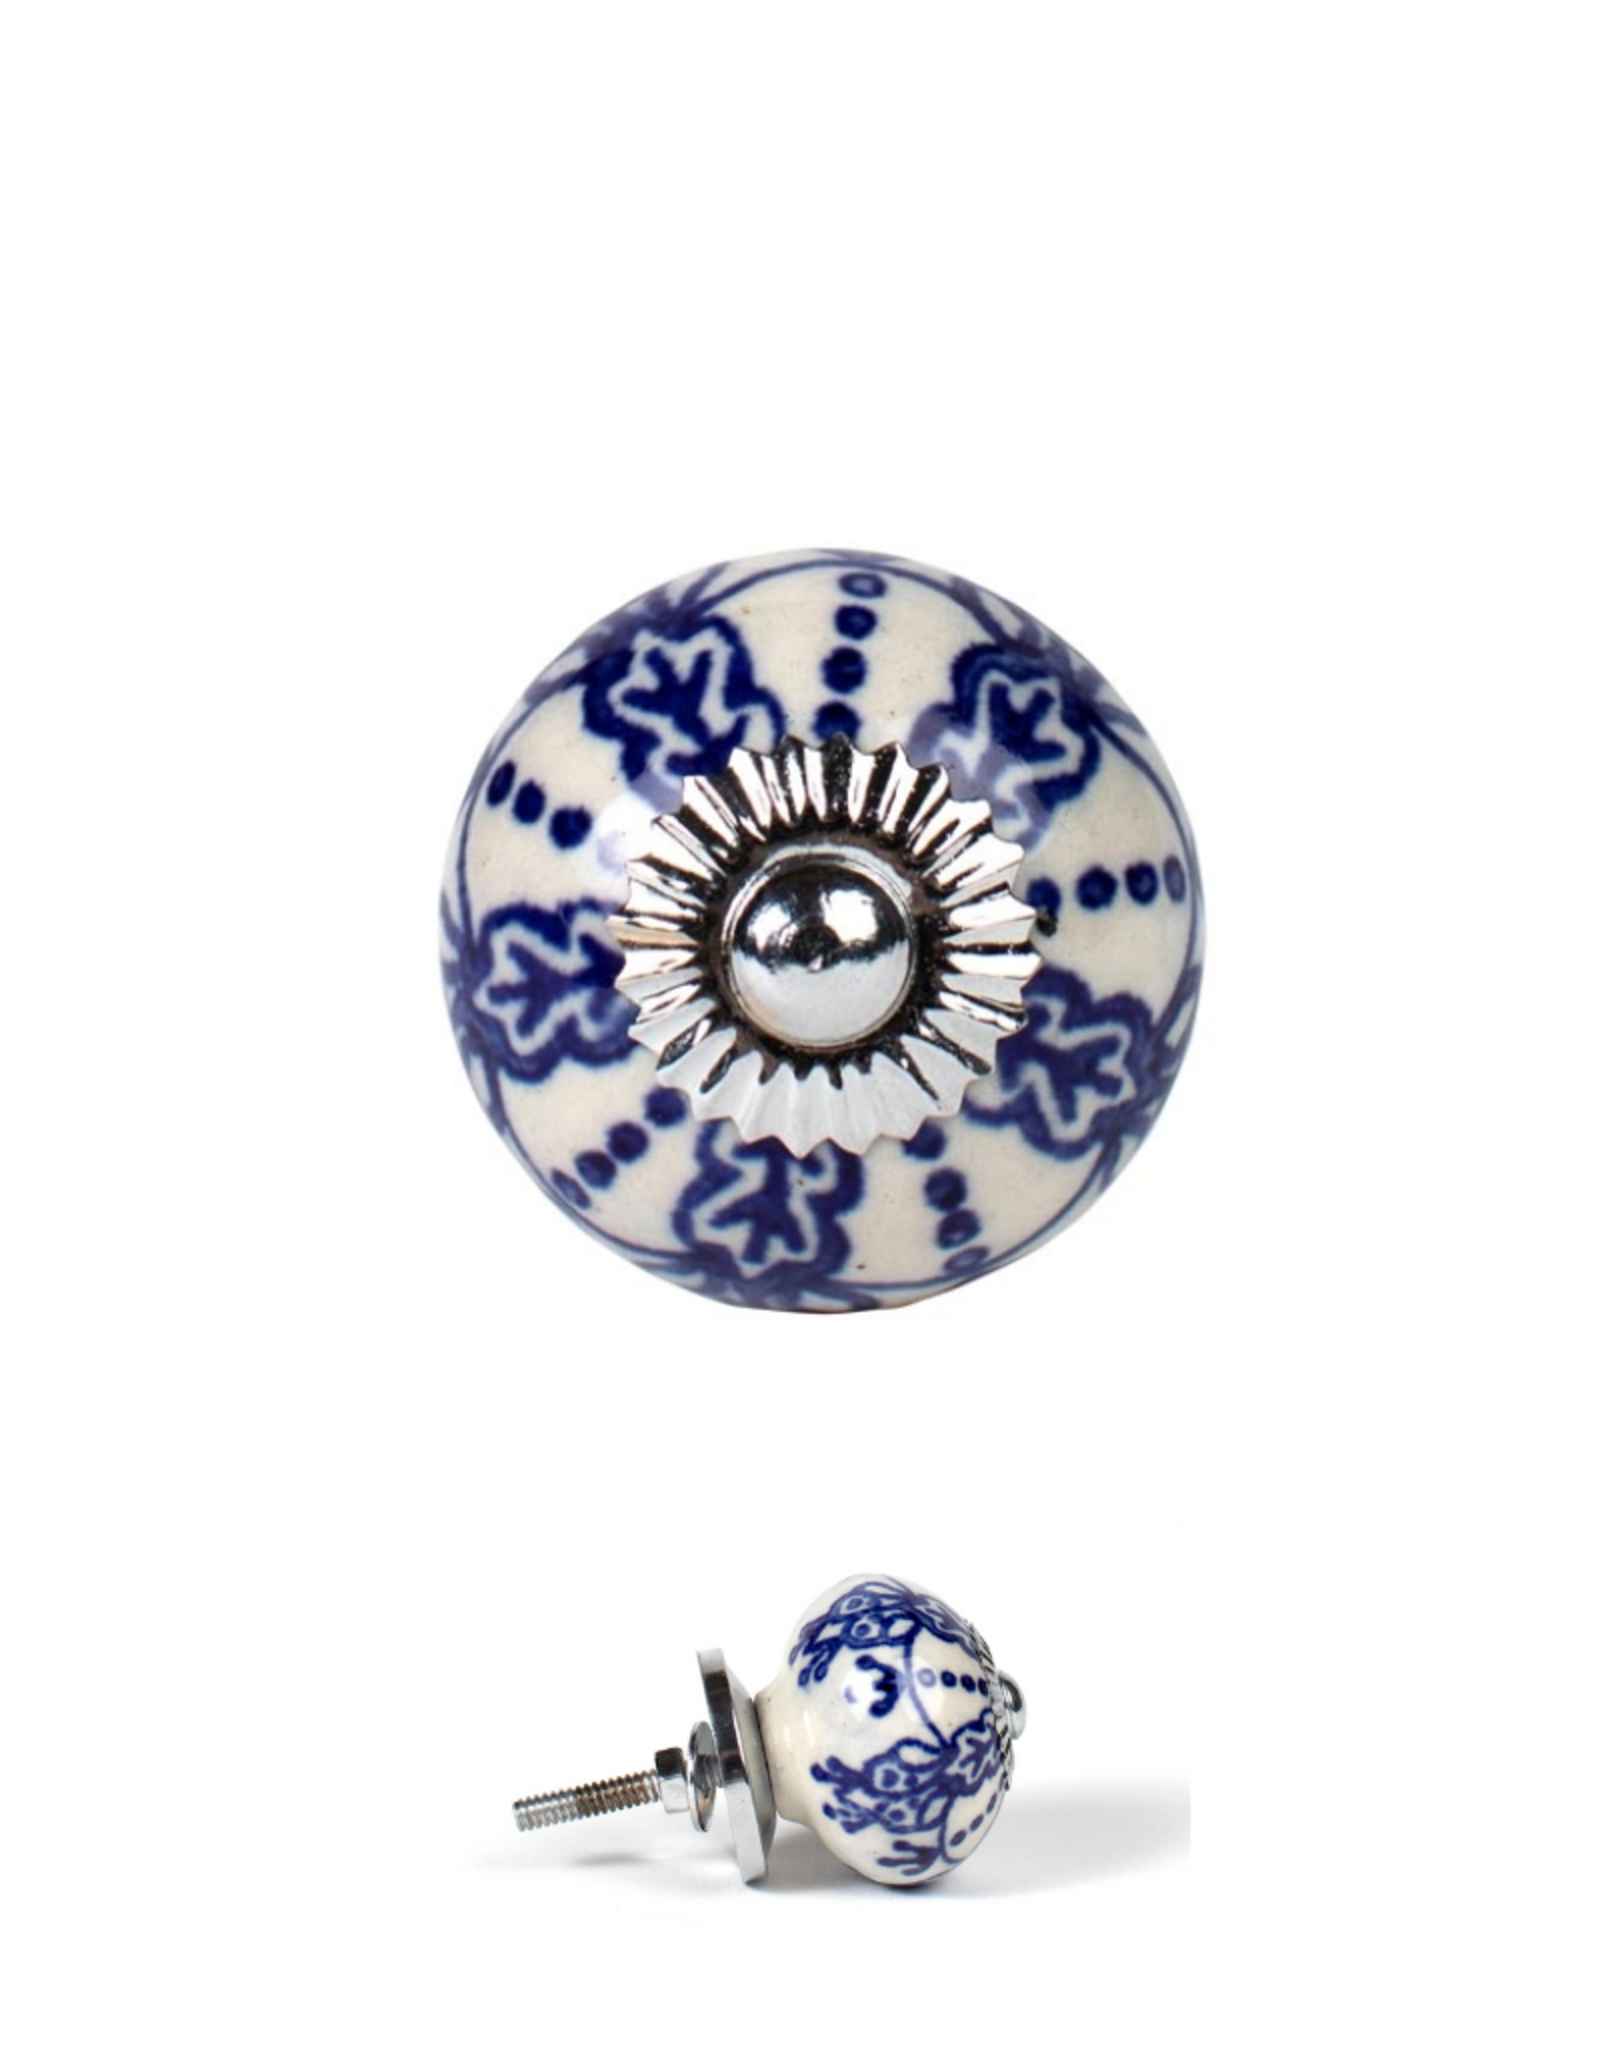 Ten Thousand Villages USA Blue and White Cabinet Knob - India